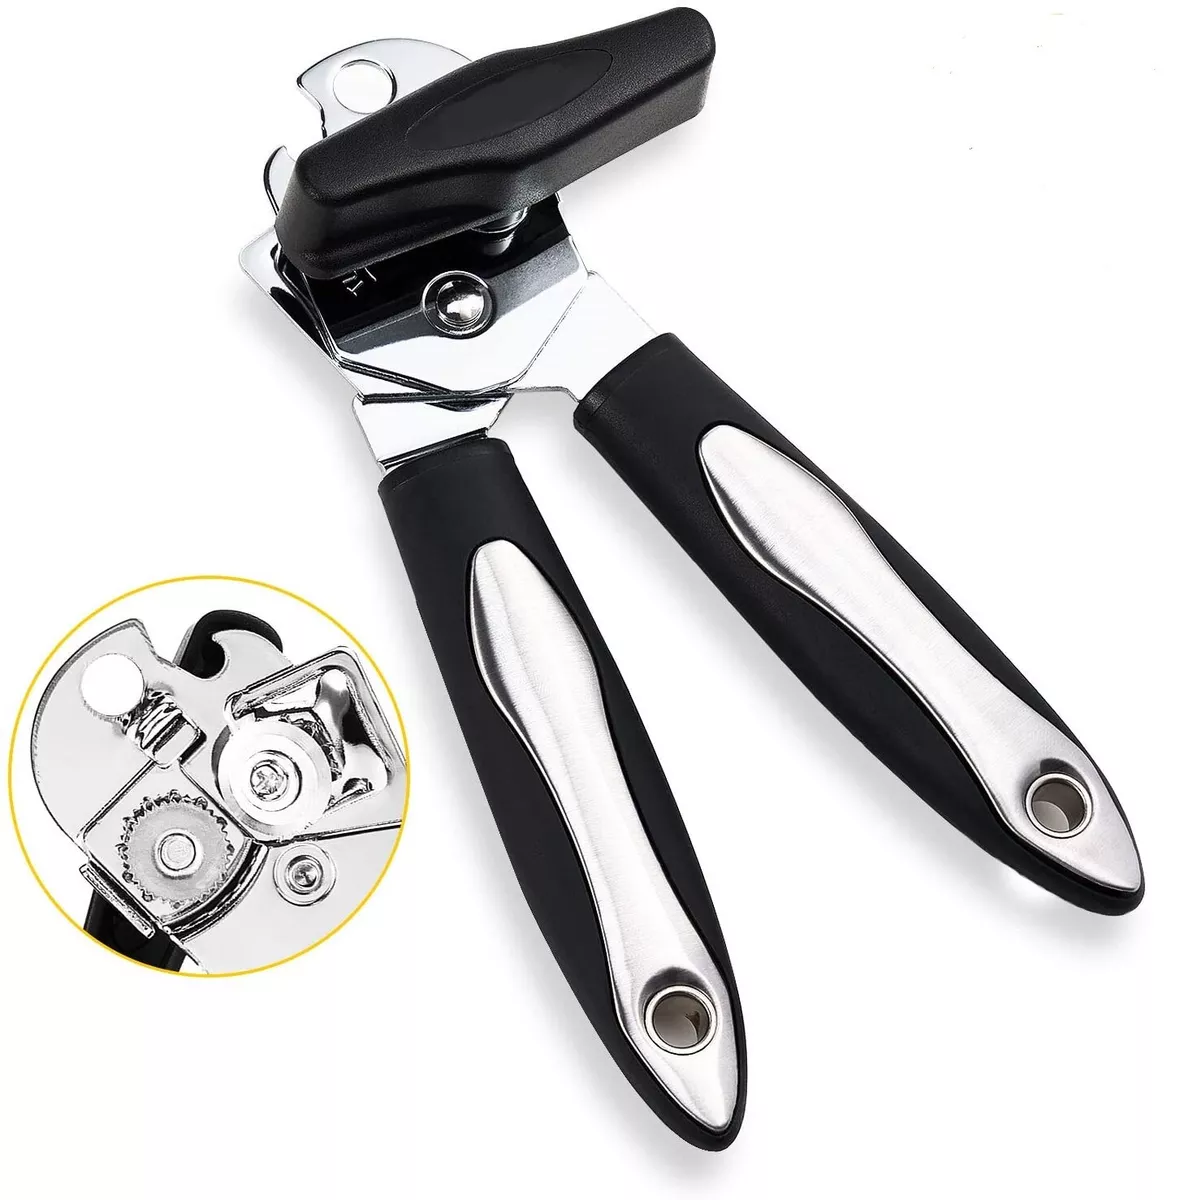 Can Opener,Professional 3-in-1 Multifunctional Manual Can Openers Bottle Opener,Kitchen Durable Stainless Steel Heavy Duty Can Opener Smooth Edge